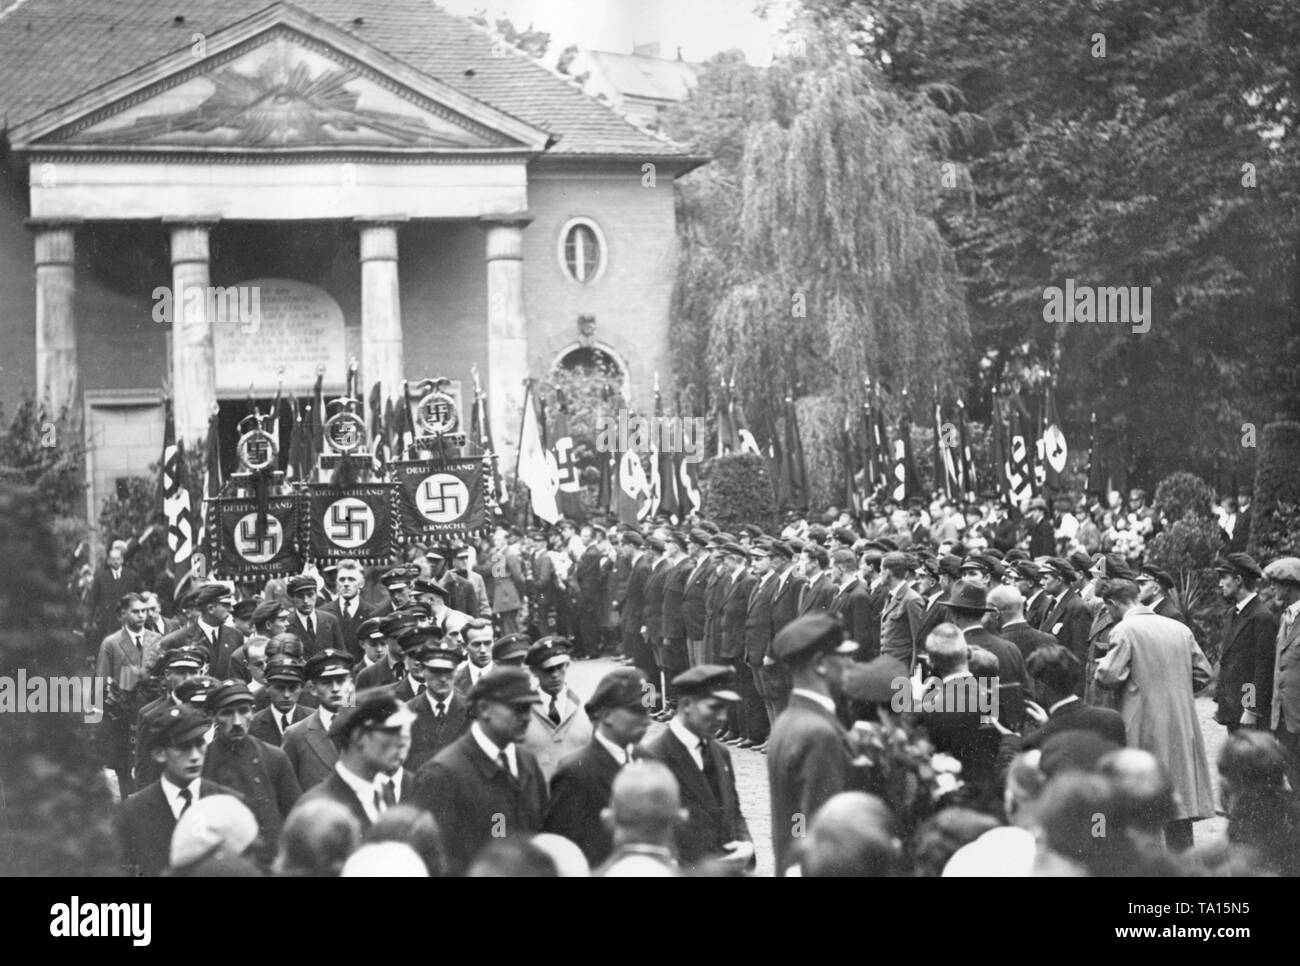 The burial of the SA member Hermann Tielsch (killed in street fights) at the Luisenstadt cemetery was transformed  by Joseph Goebbels into a large NSDAP propaganda event. Tielsch was honored with flag marches and guards of honor made up of SA men. Stock Photo